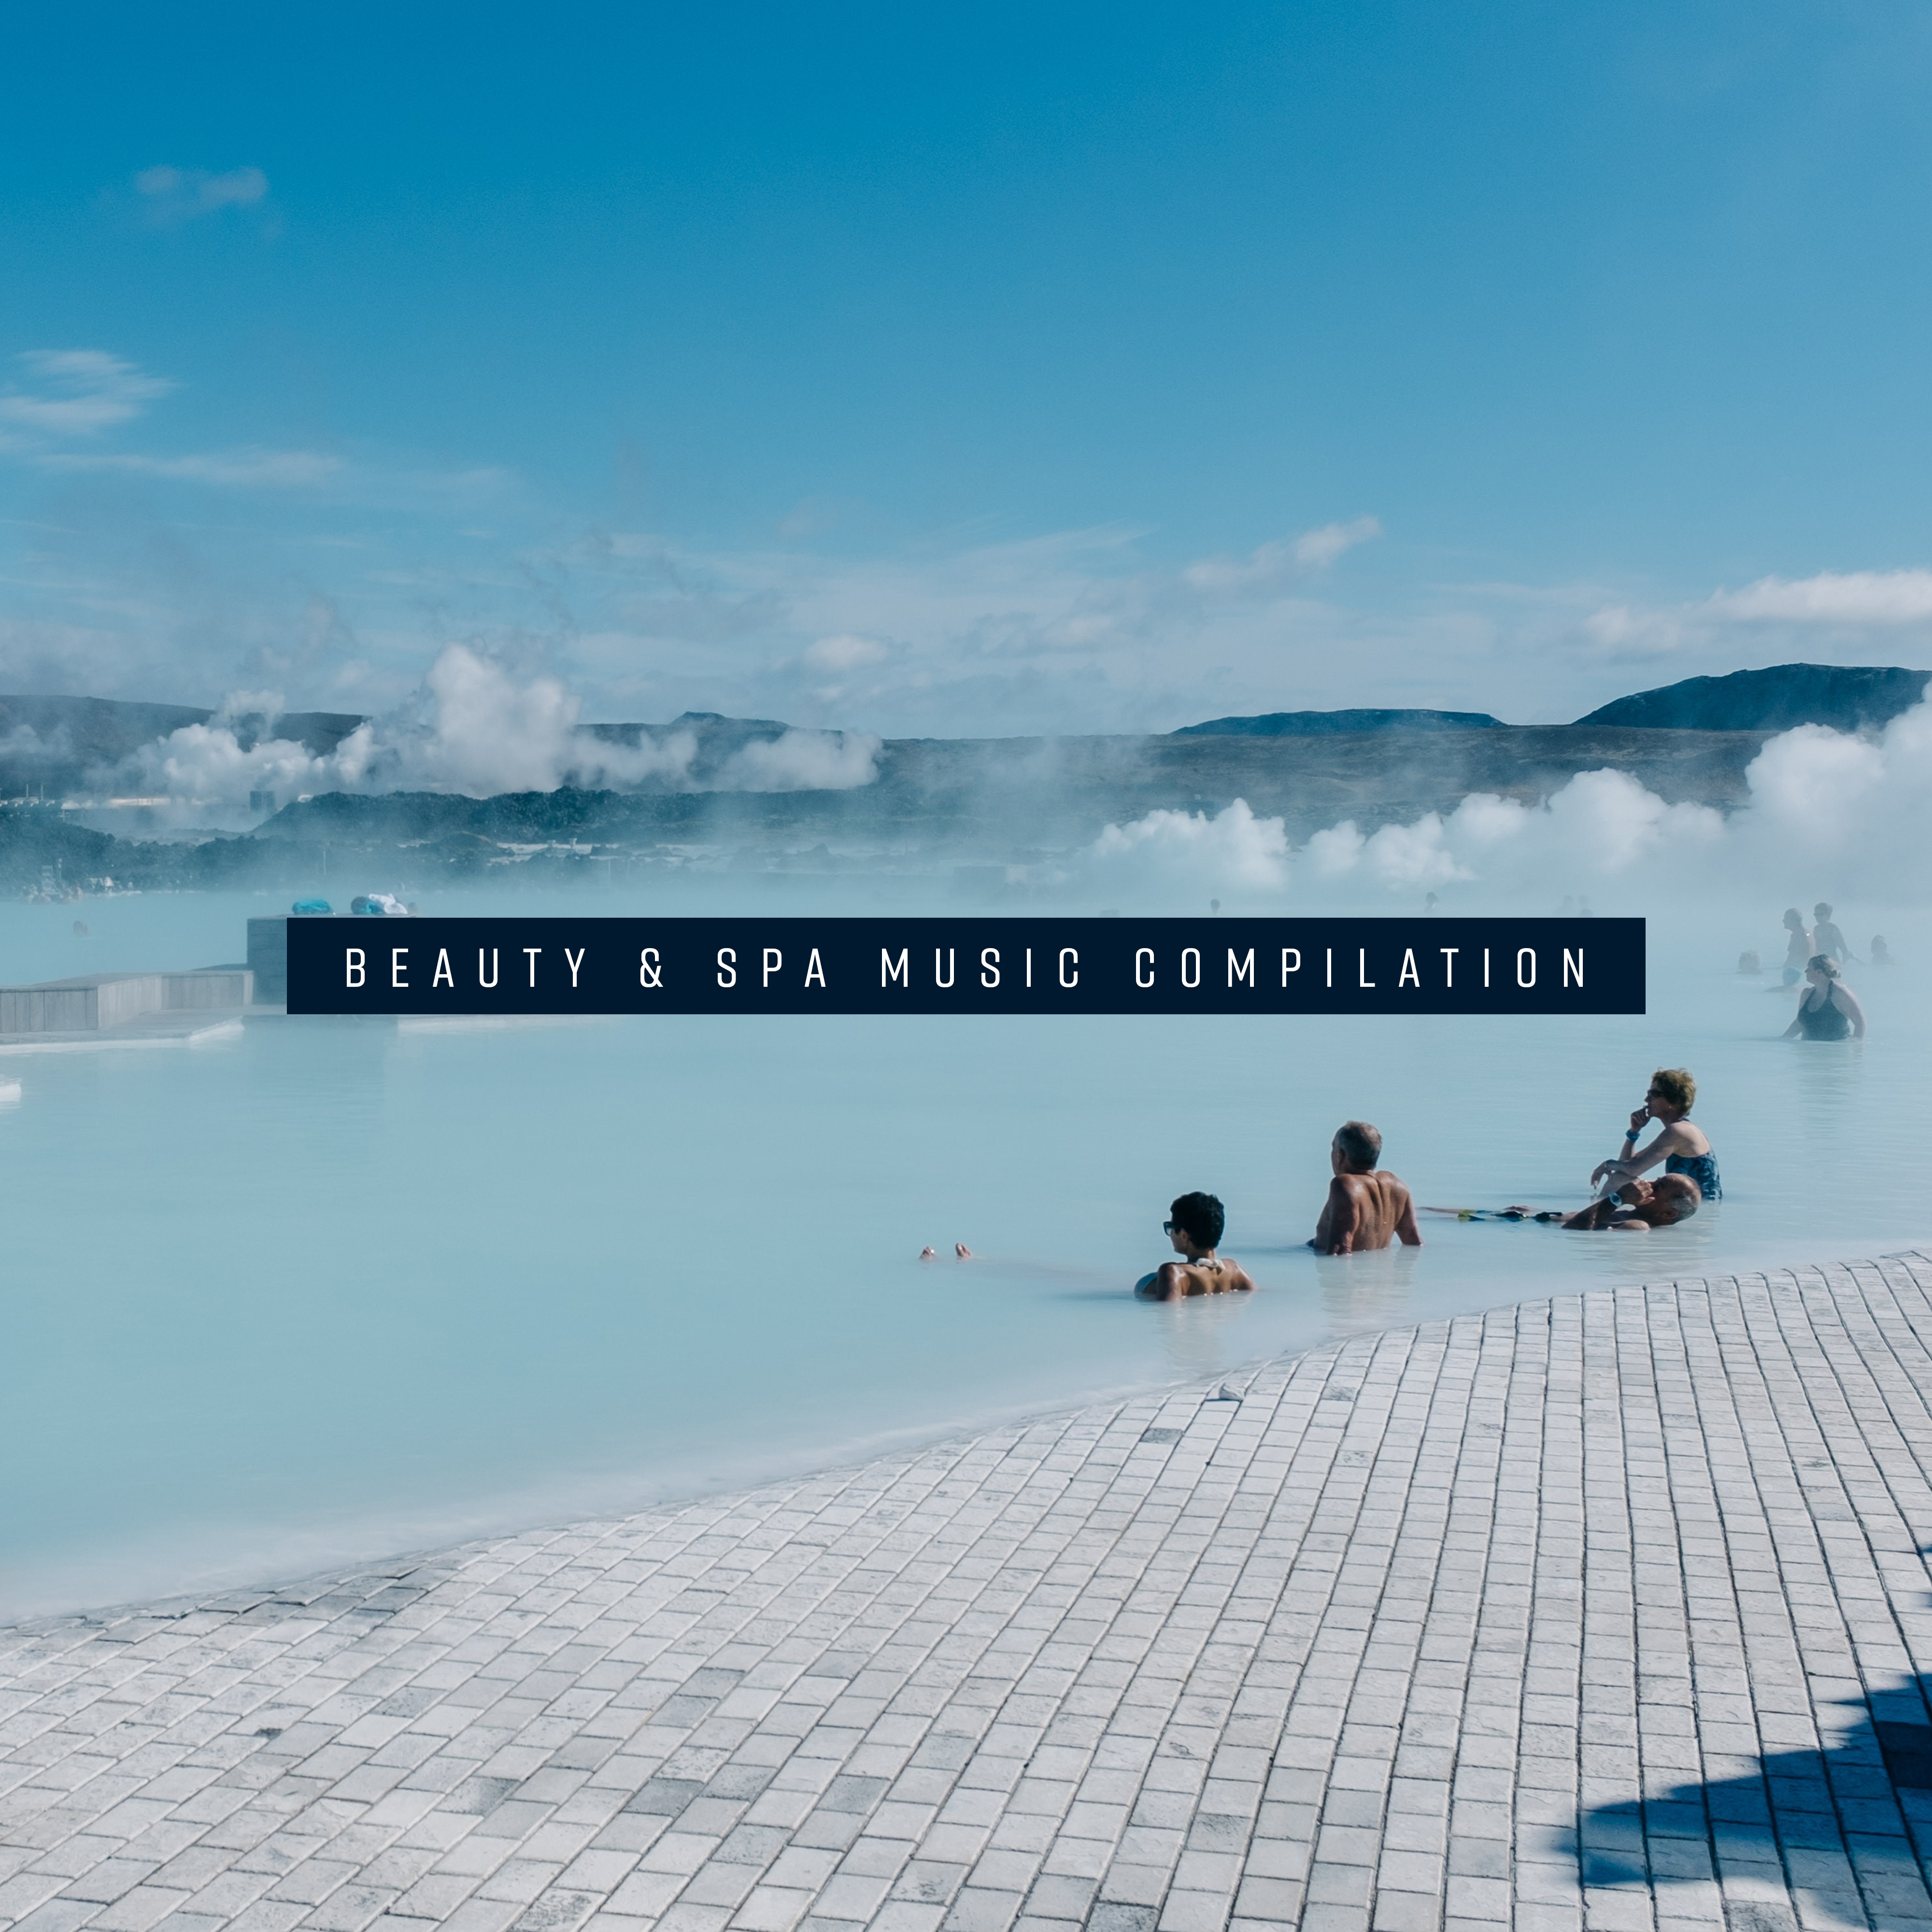 Beauty & Spa Music Compilation